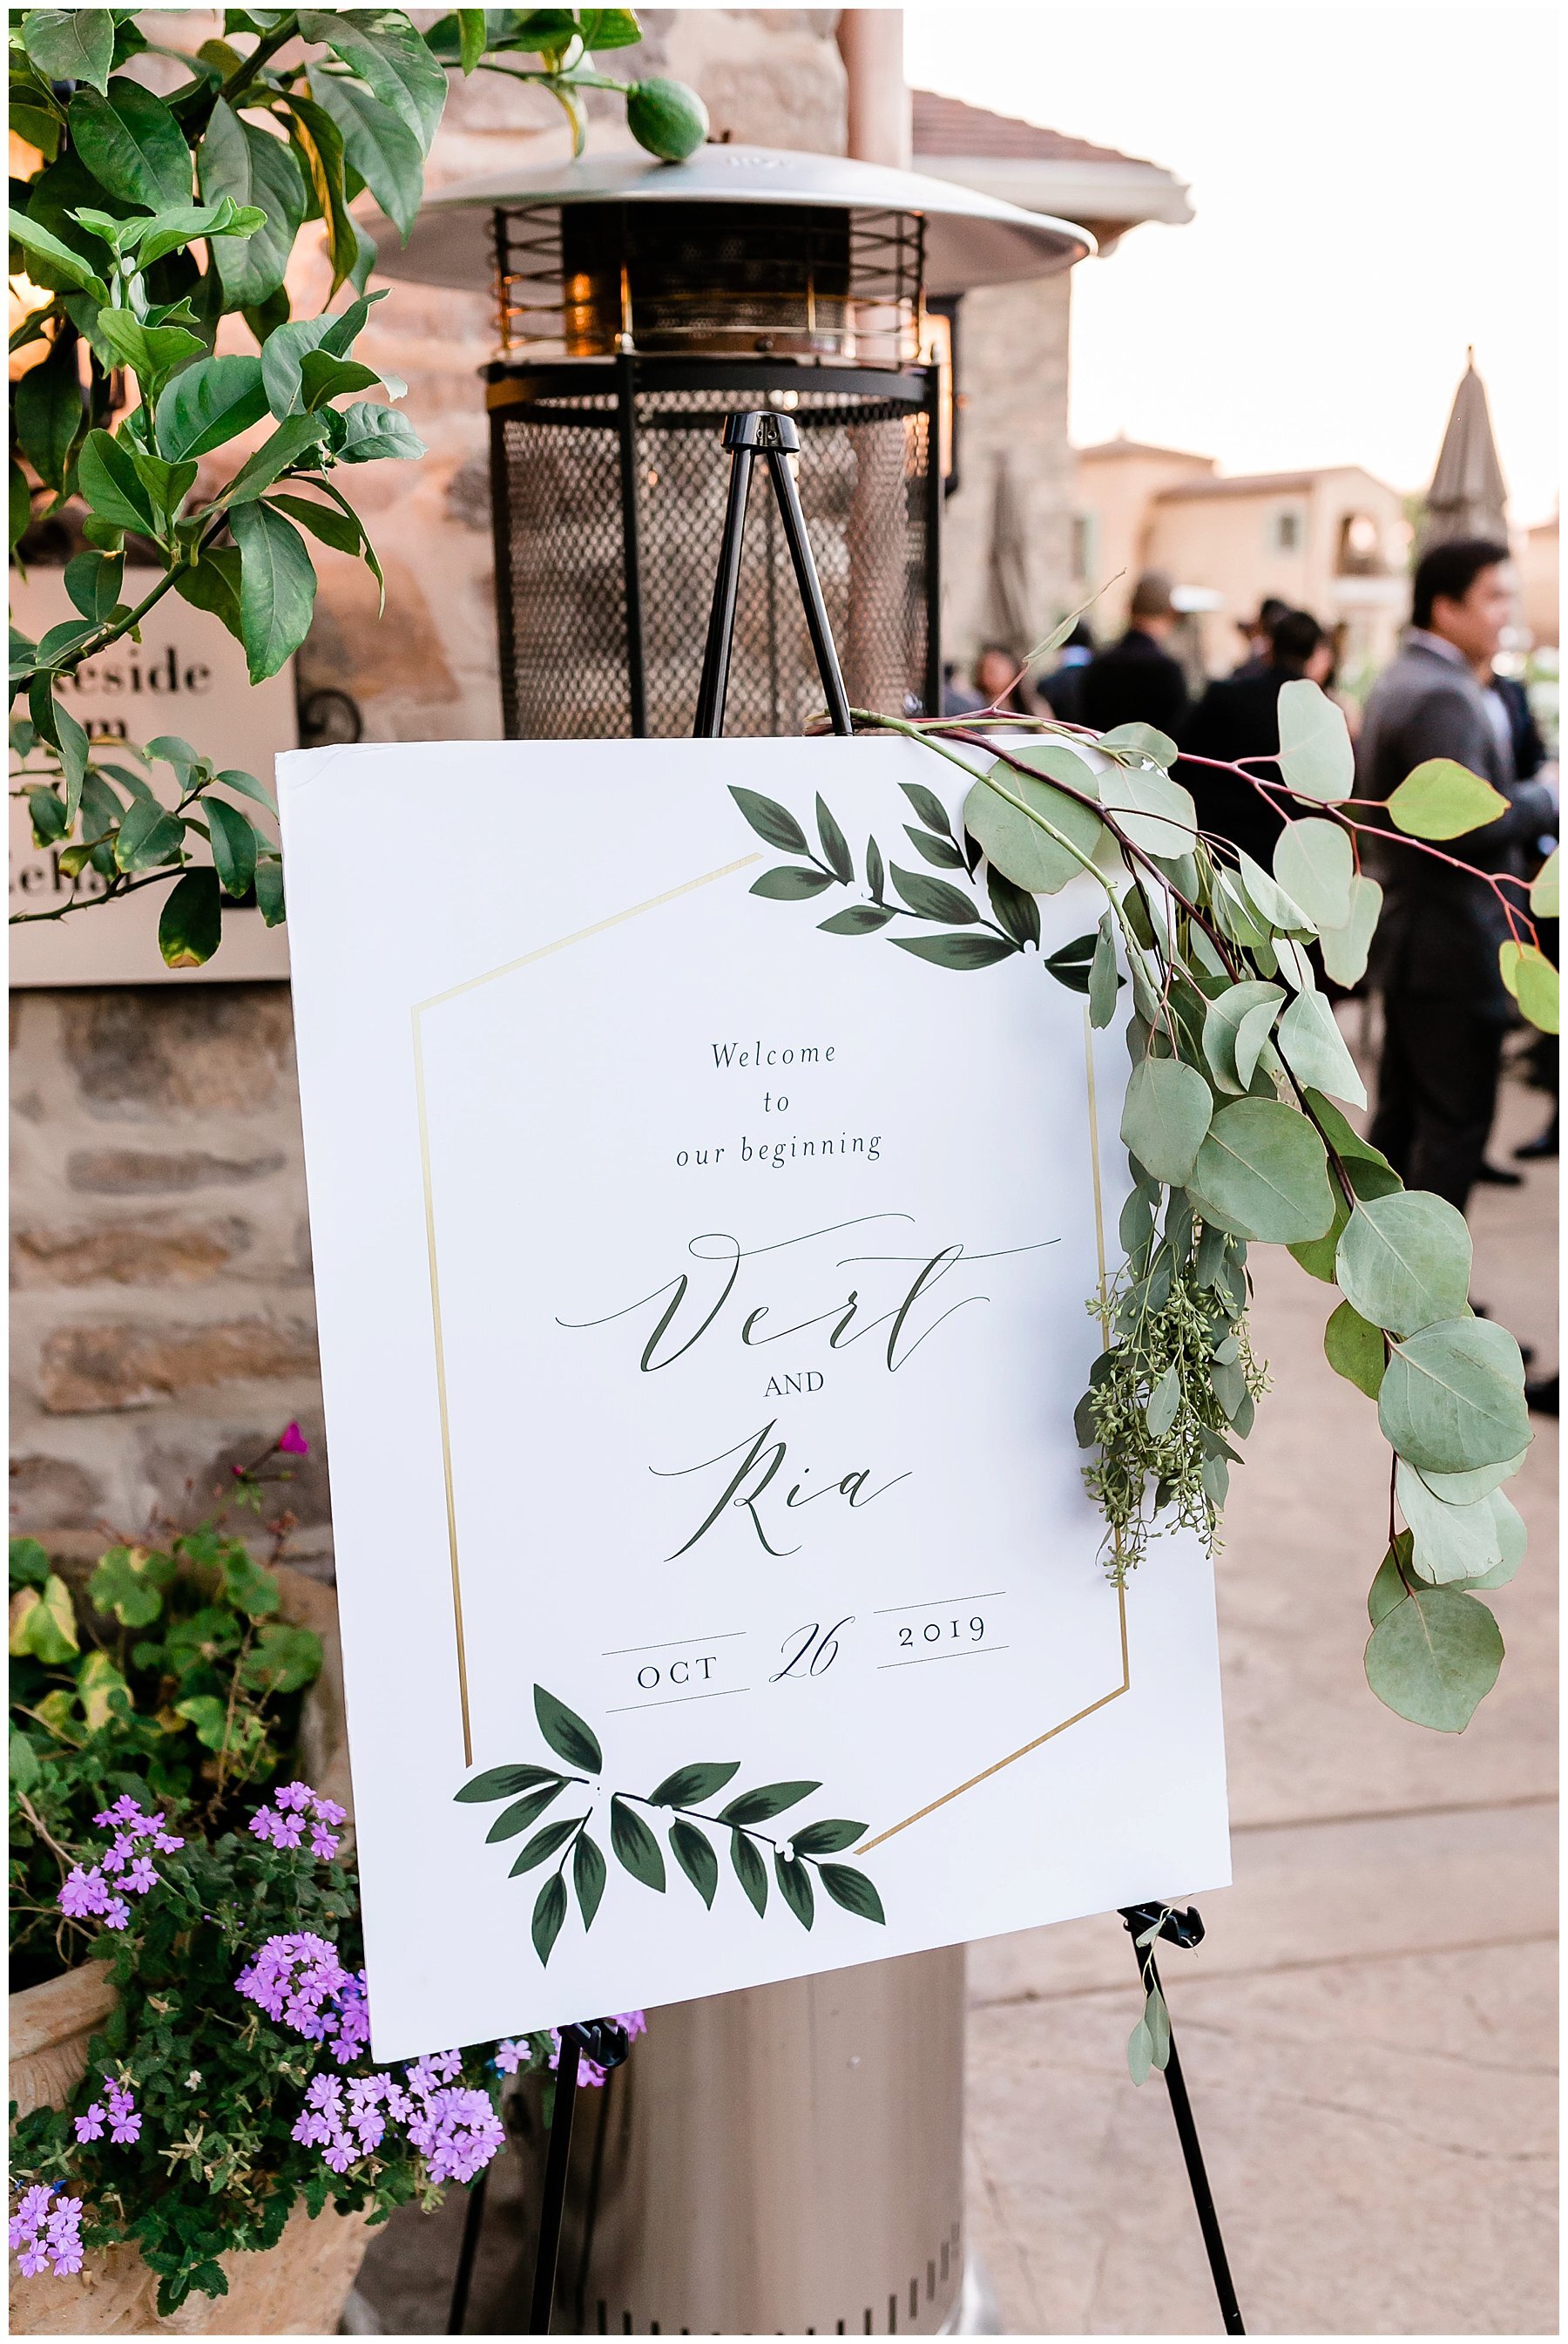  welcome to the wedding sign 